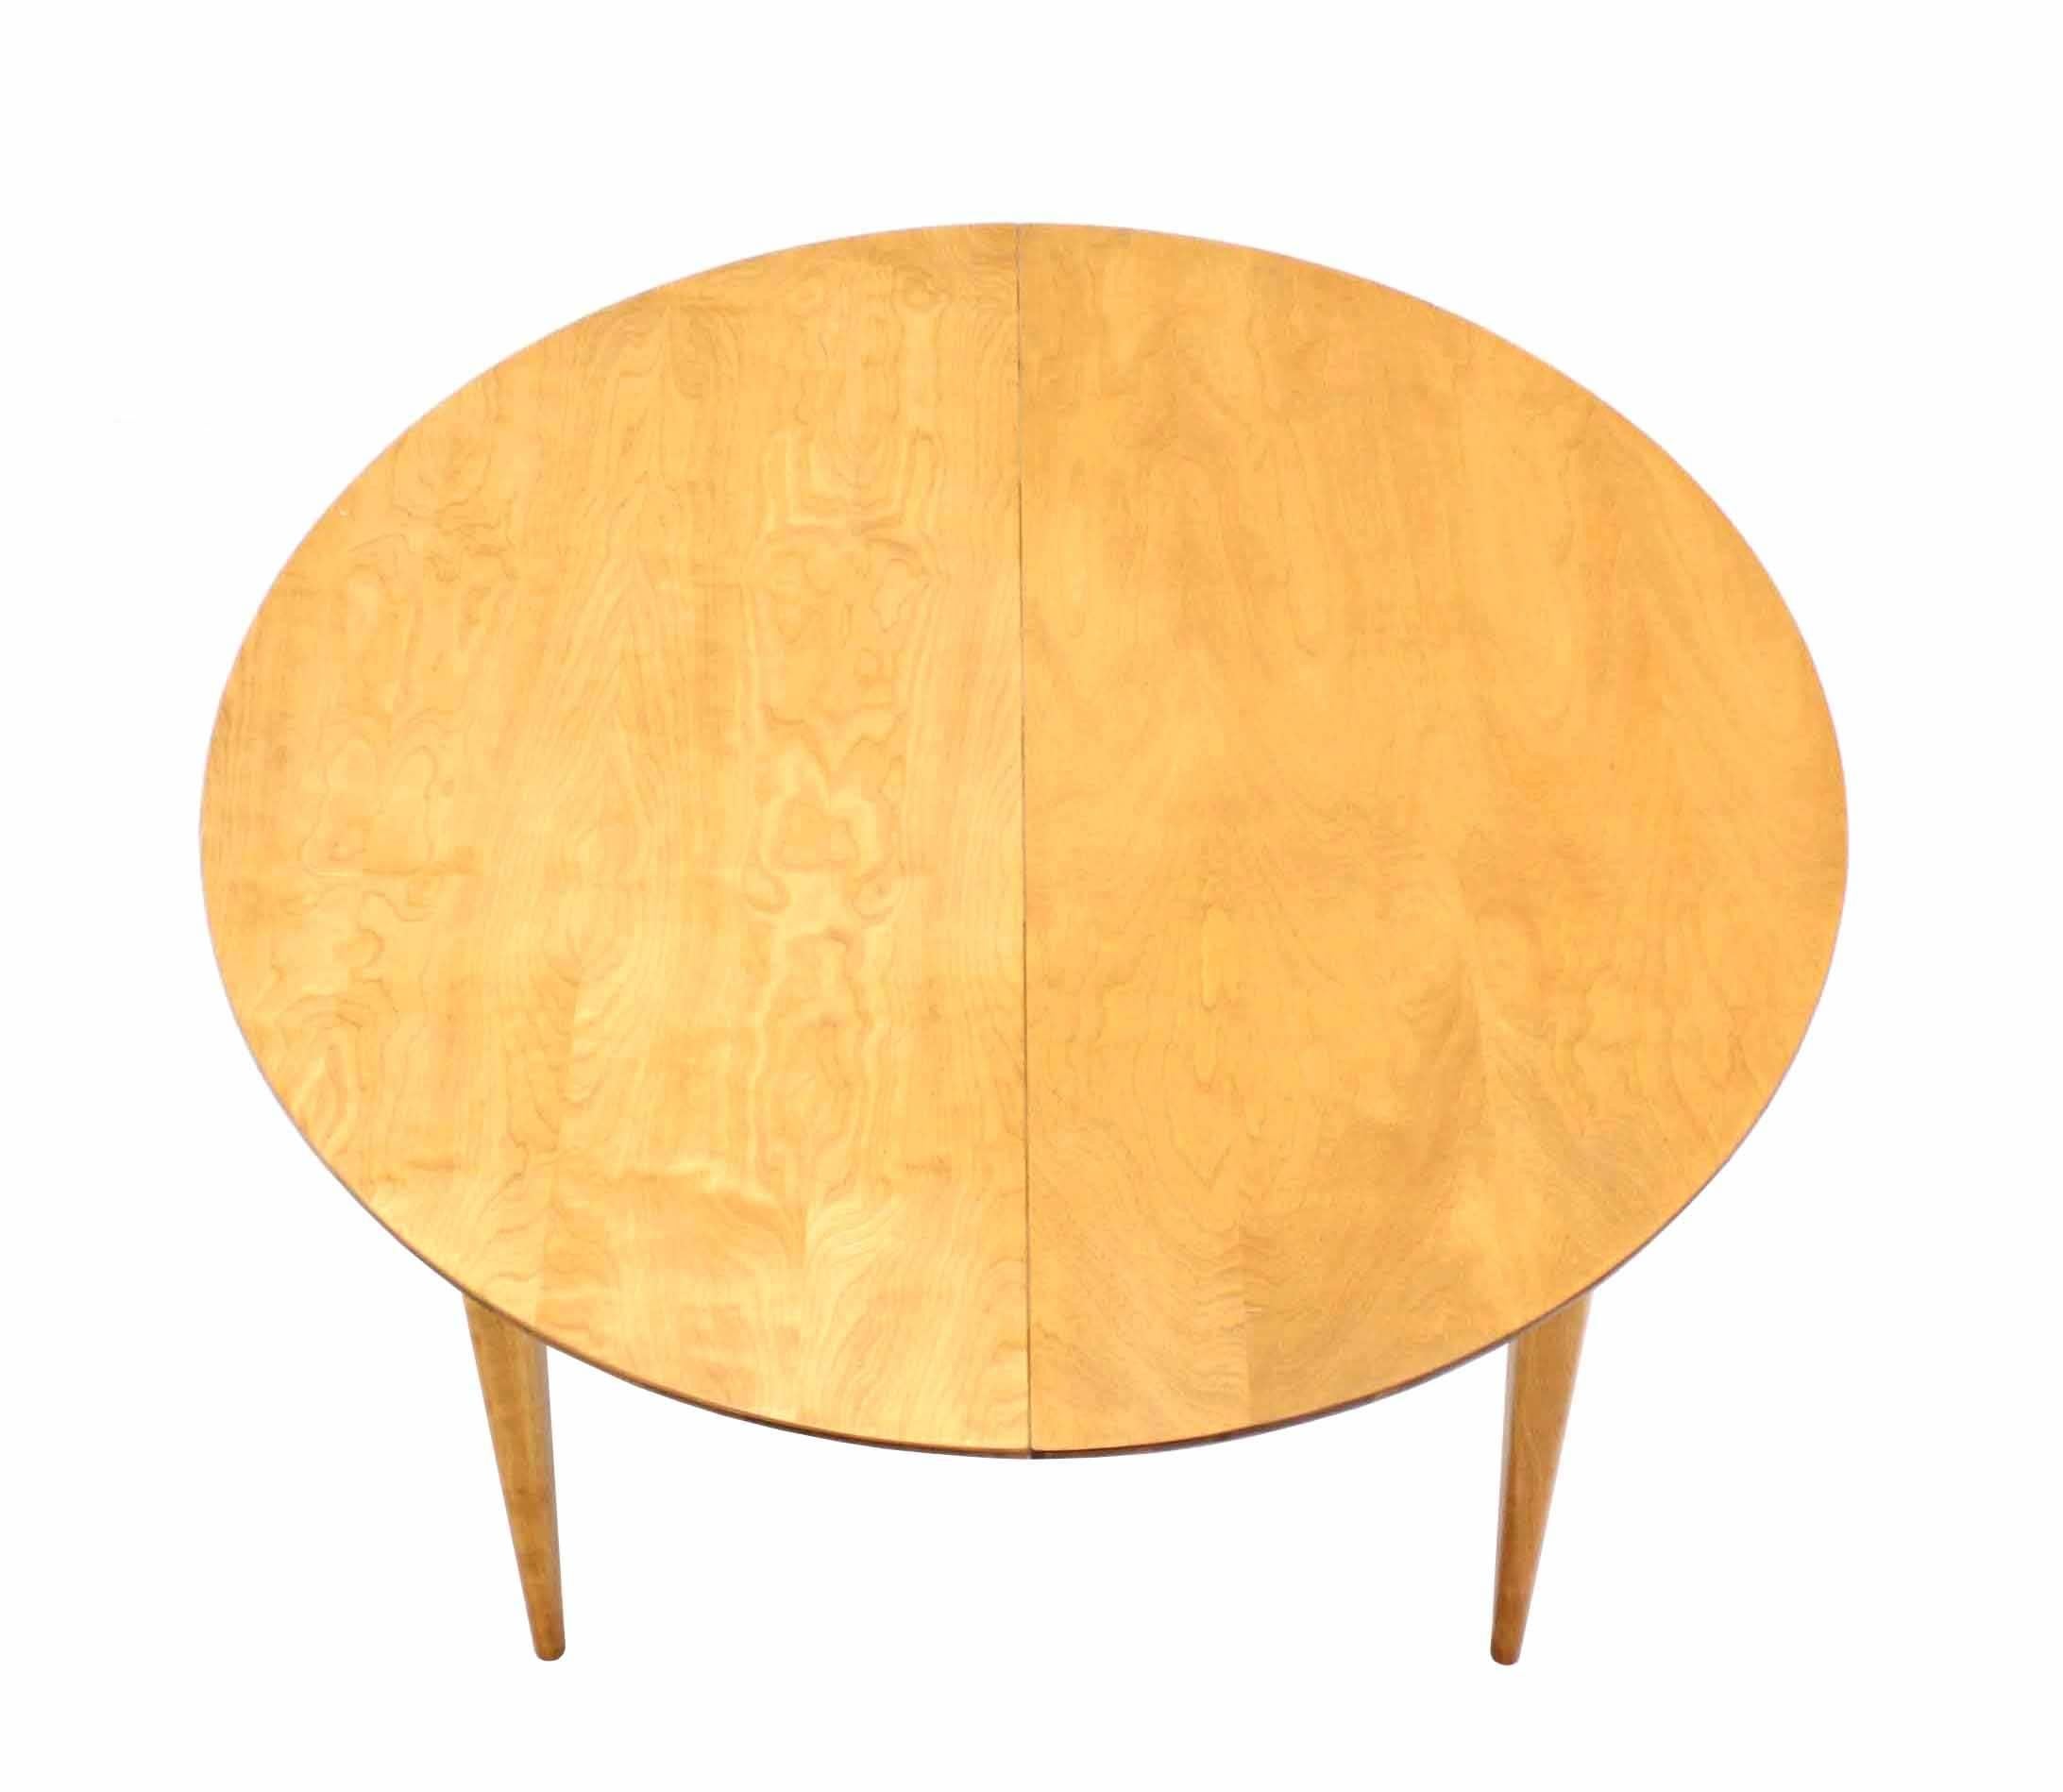 Mid-Century Modern Round Birch Dining Table with Three Leaves